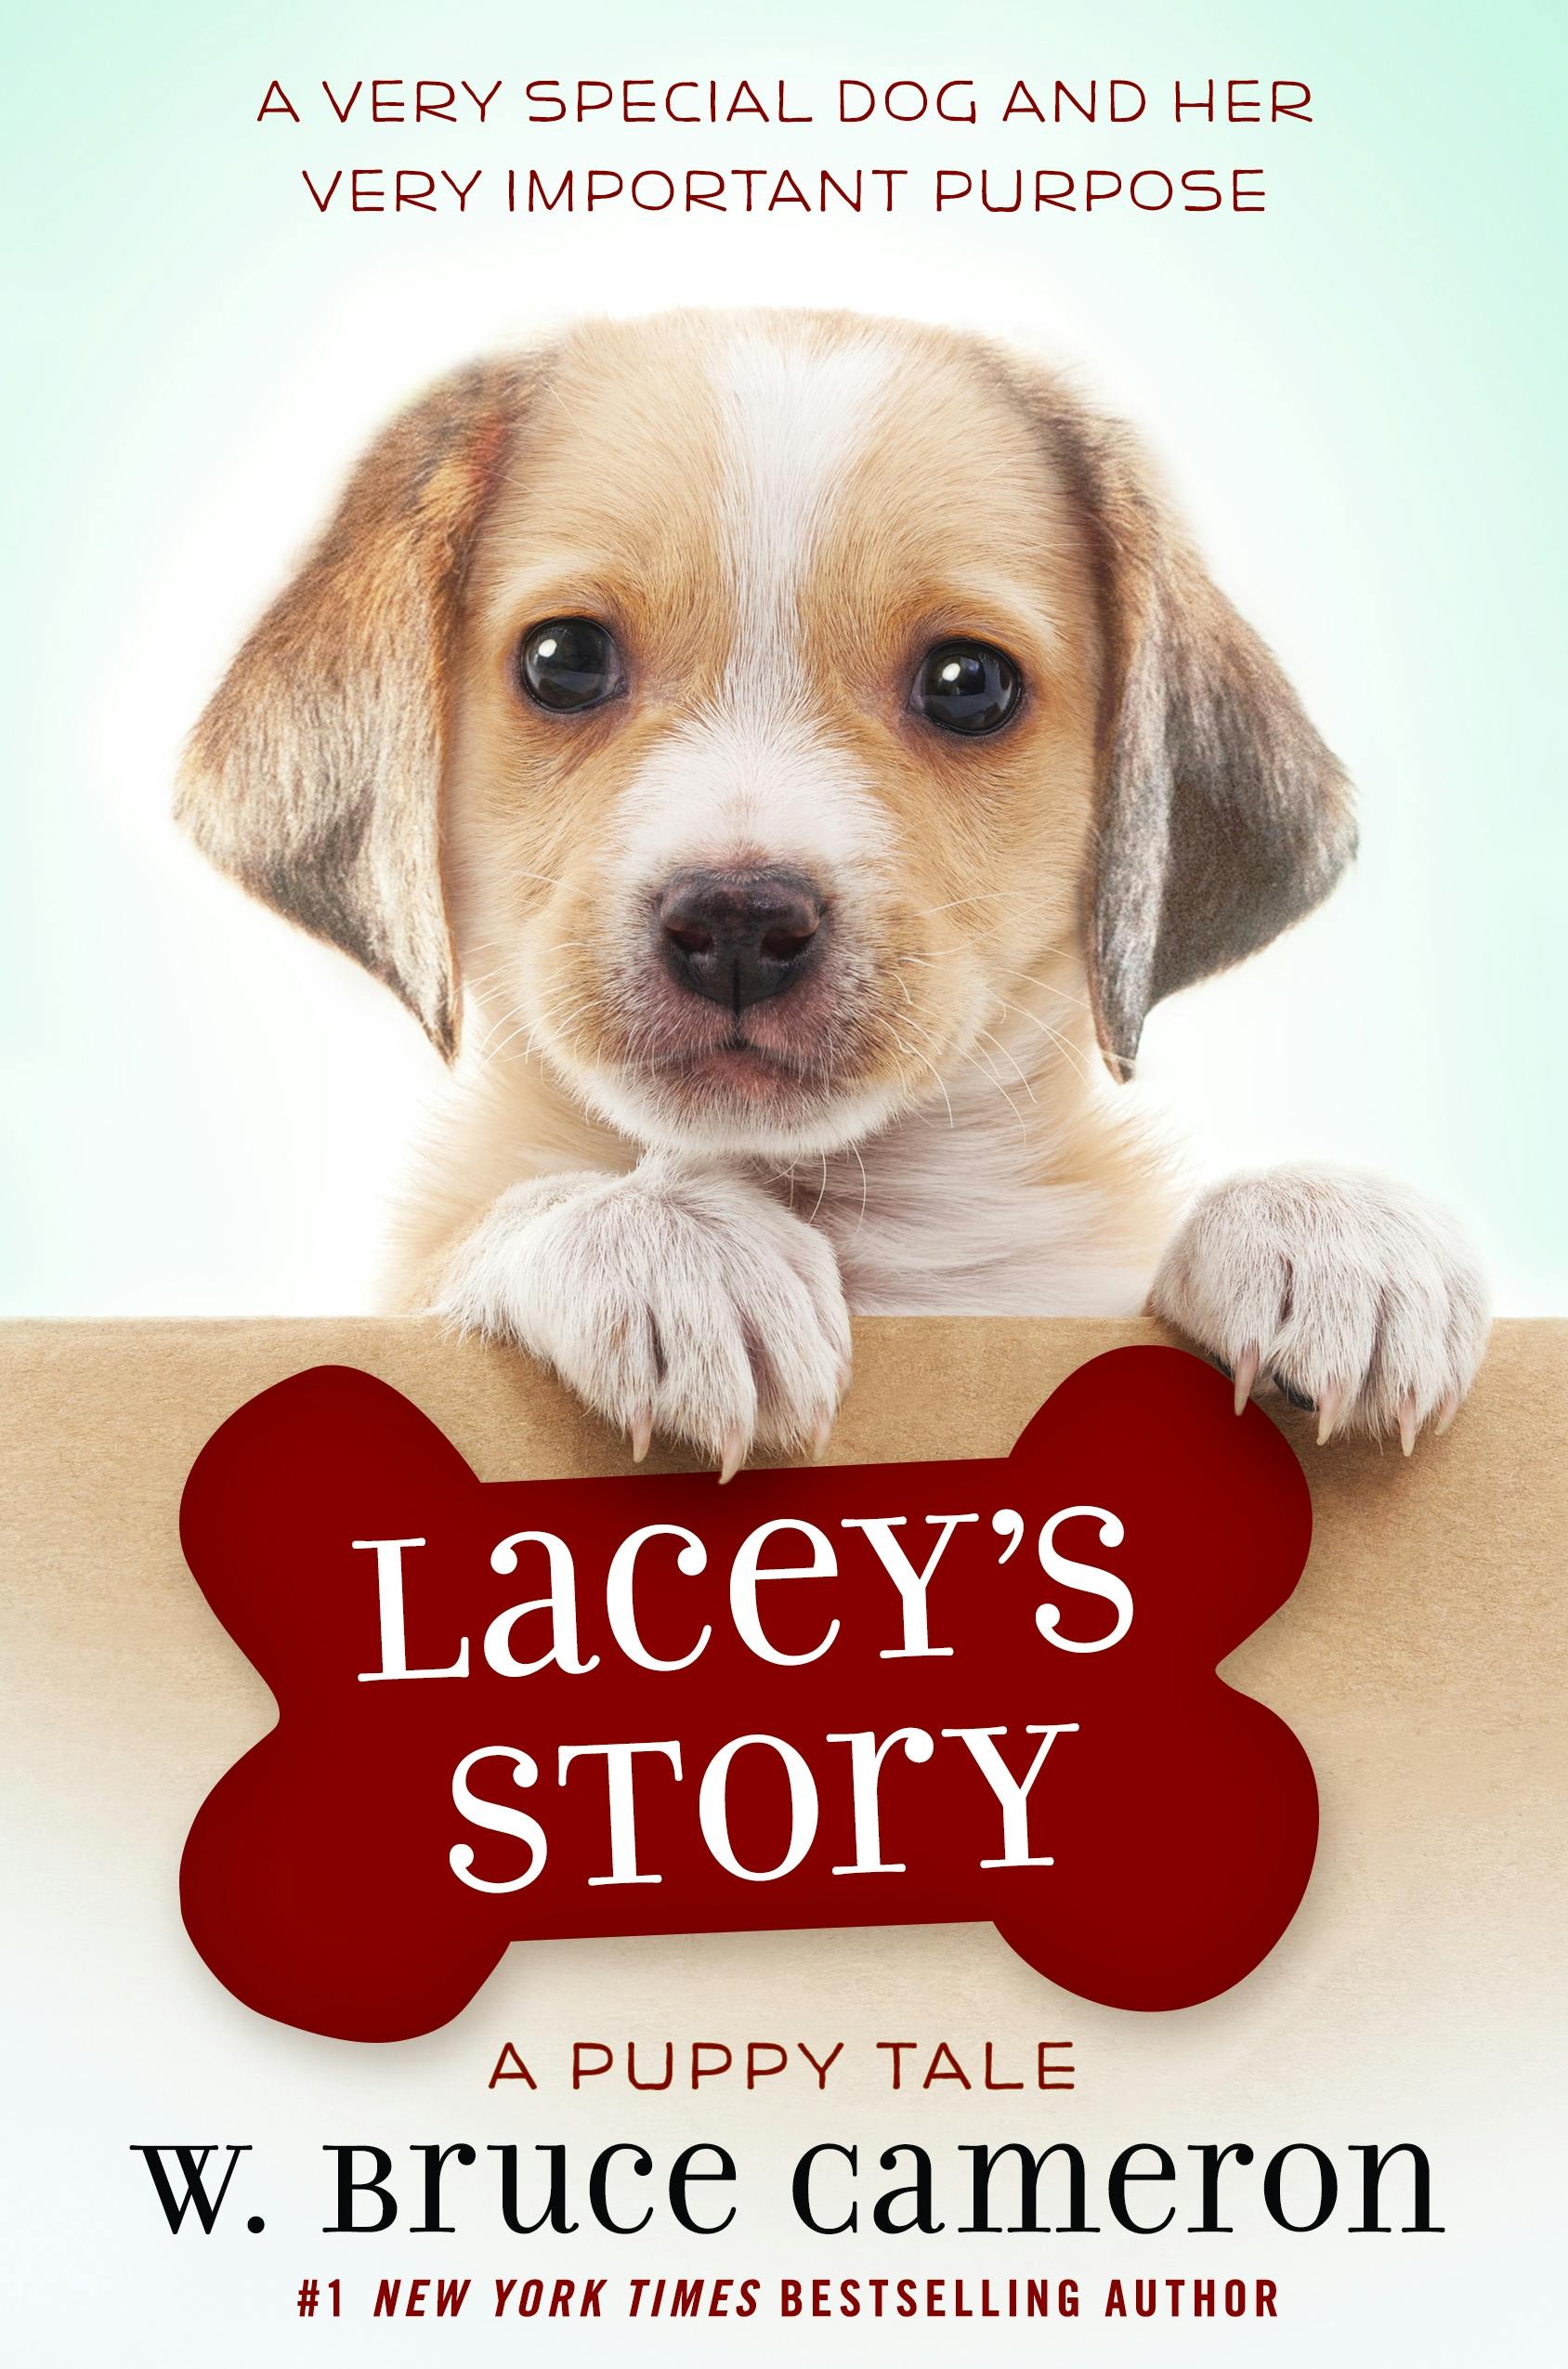 Cover for the book titled as: Lacey's Story